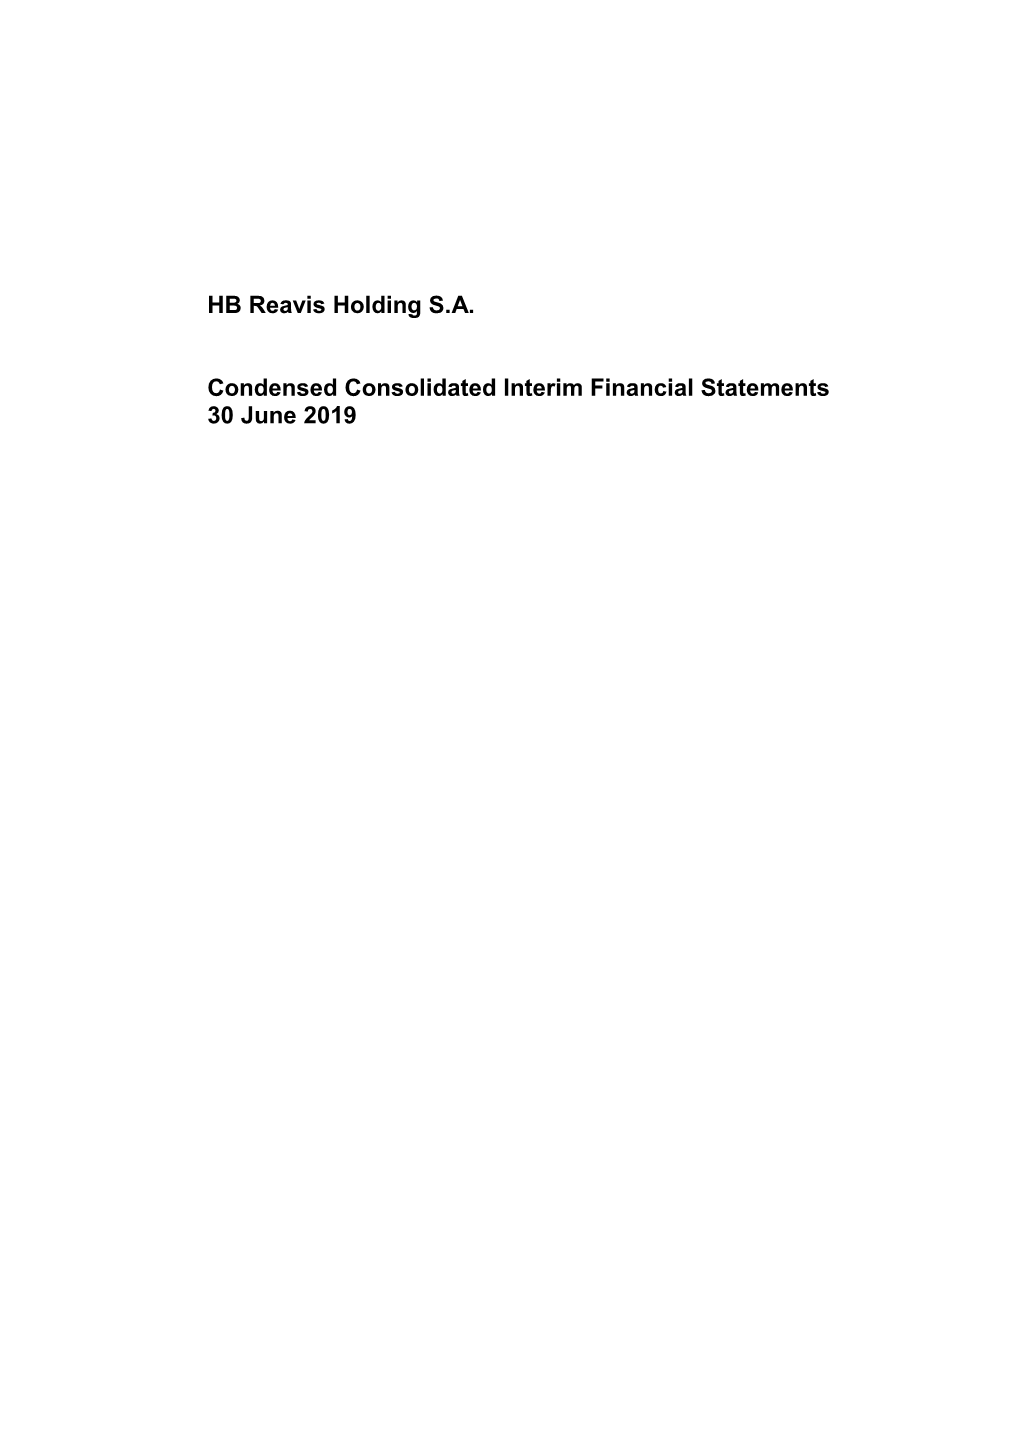 HB Reavis Holding S.A. – Condensed Consolidated Interim Financial